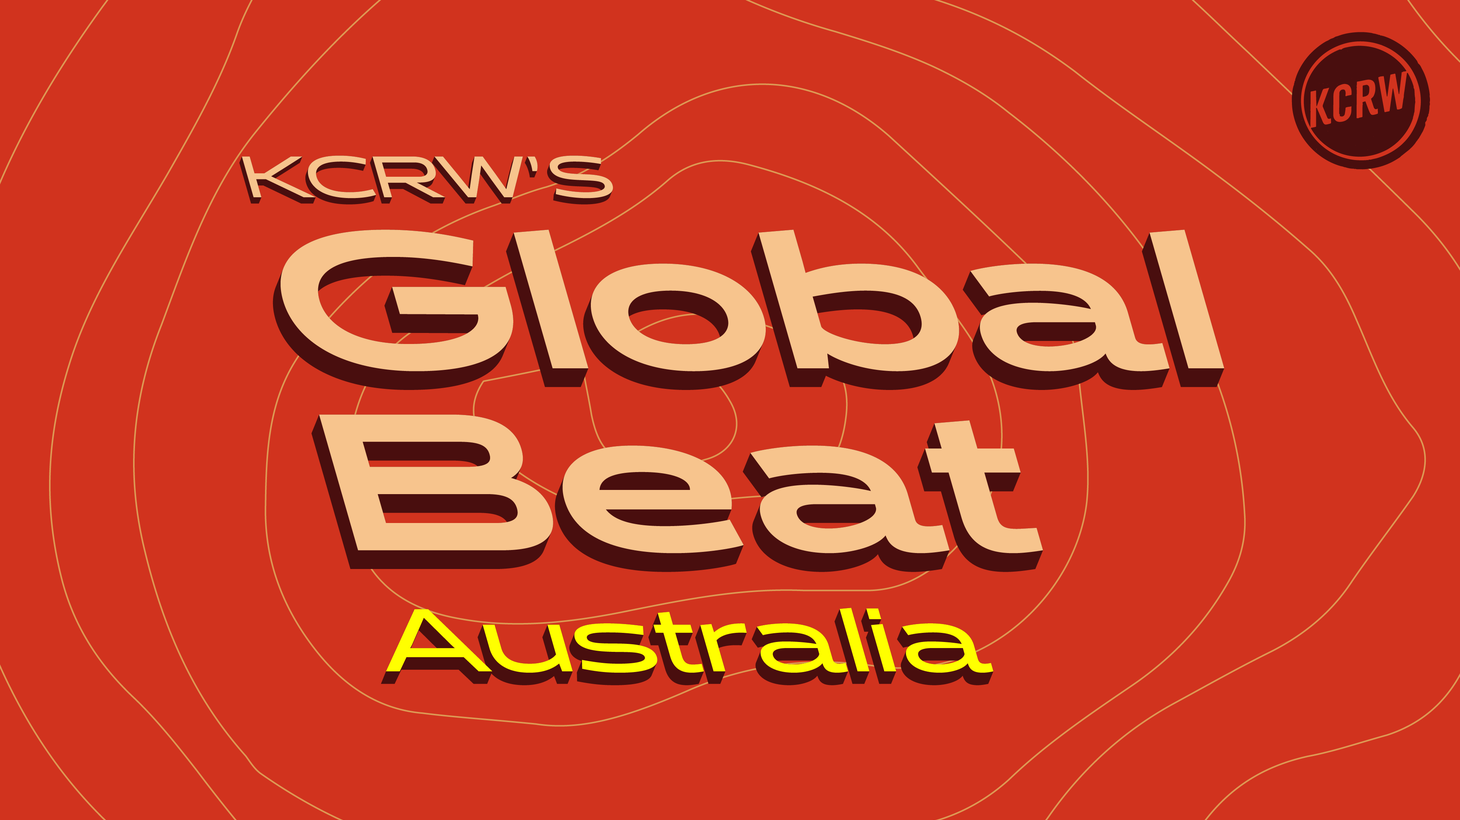 KCRW’s Global Beat is a new series highlighting emerging artists from around the world.